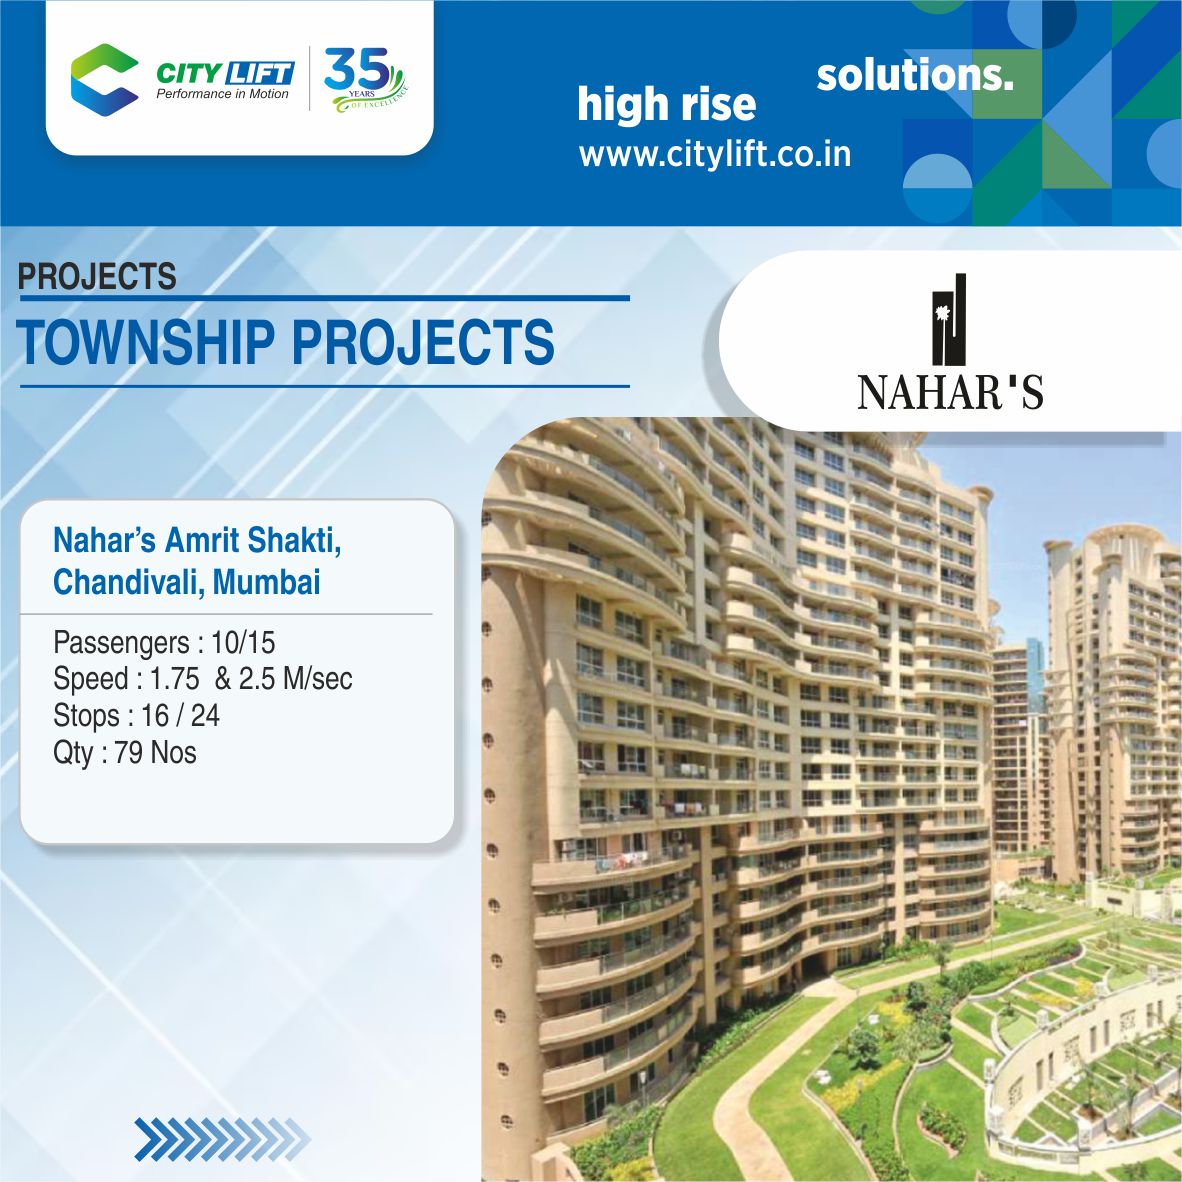 TOWNSHIP PROJECTS